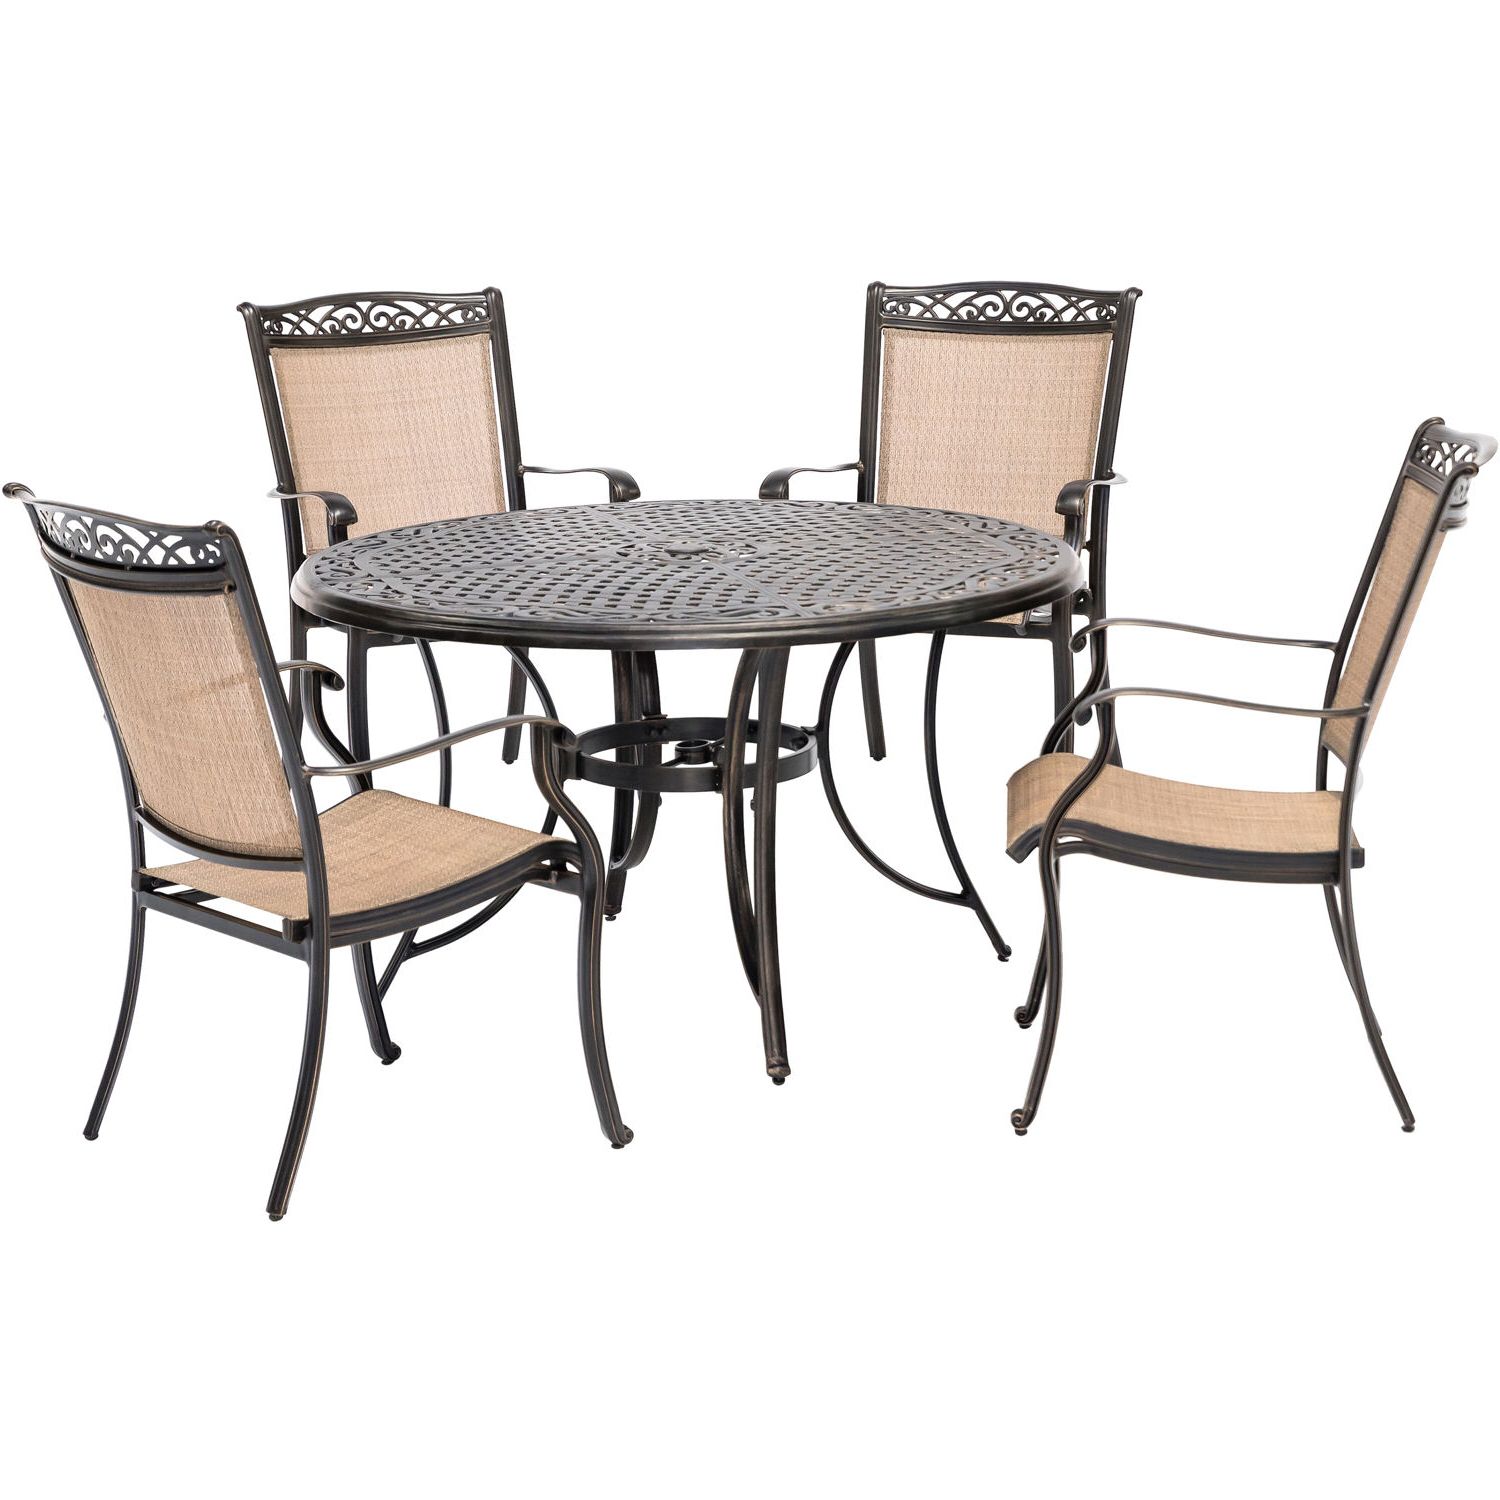 5 Piece Outdoor Bench Dining Sets Regarding Popular Hanover Fontana 5 Piece Outdoor Dining Set With 4 Sling Chairs And A  (View 9 of 15)